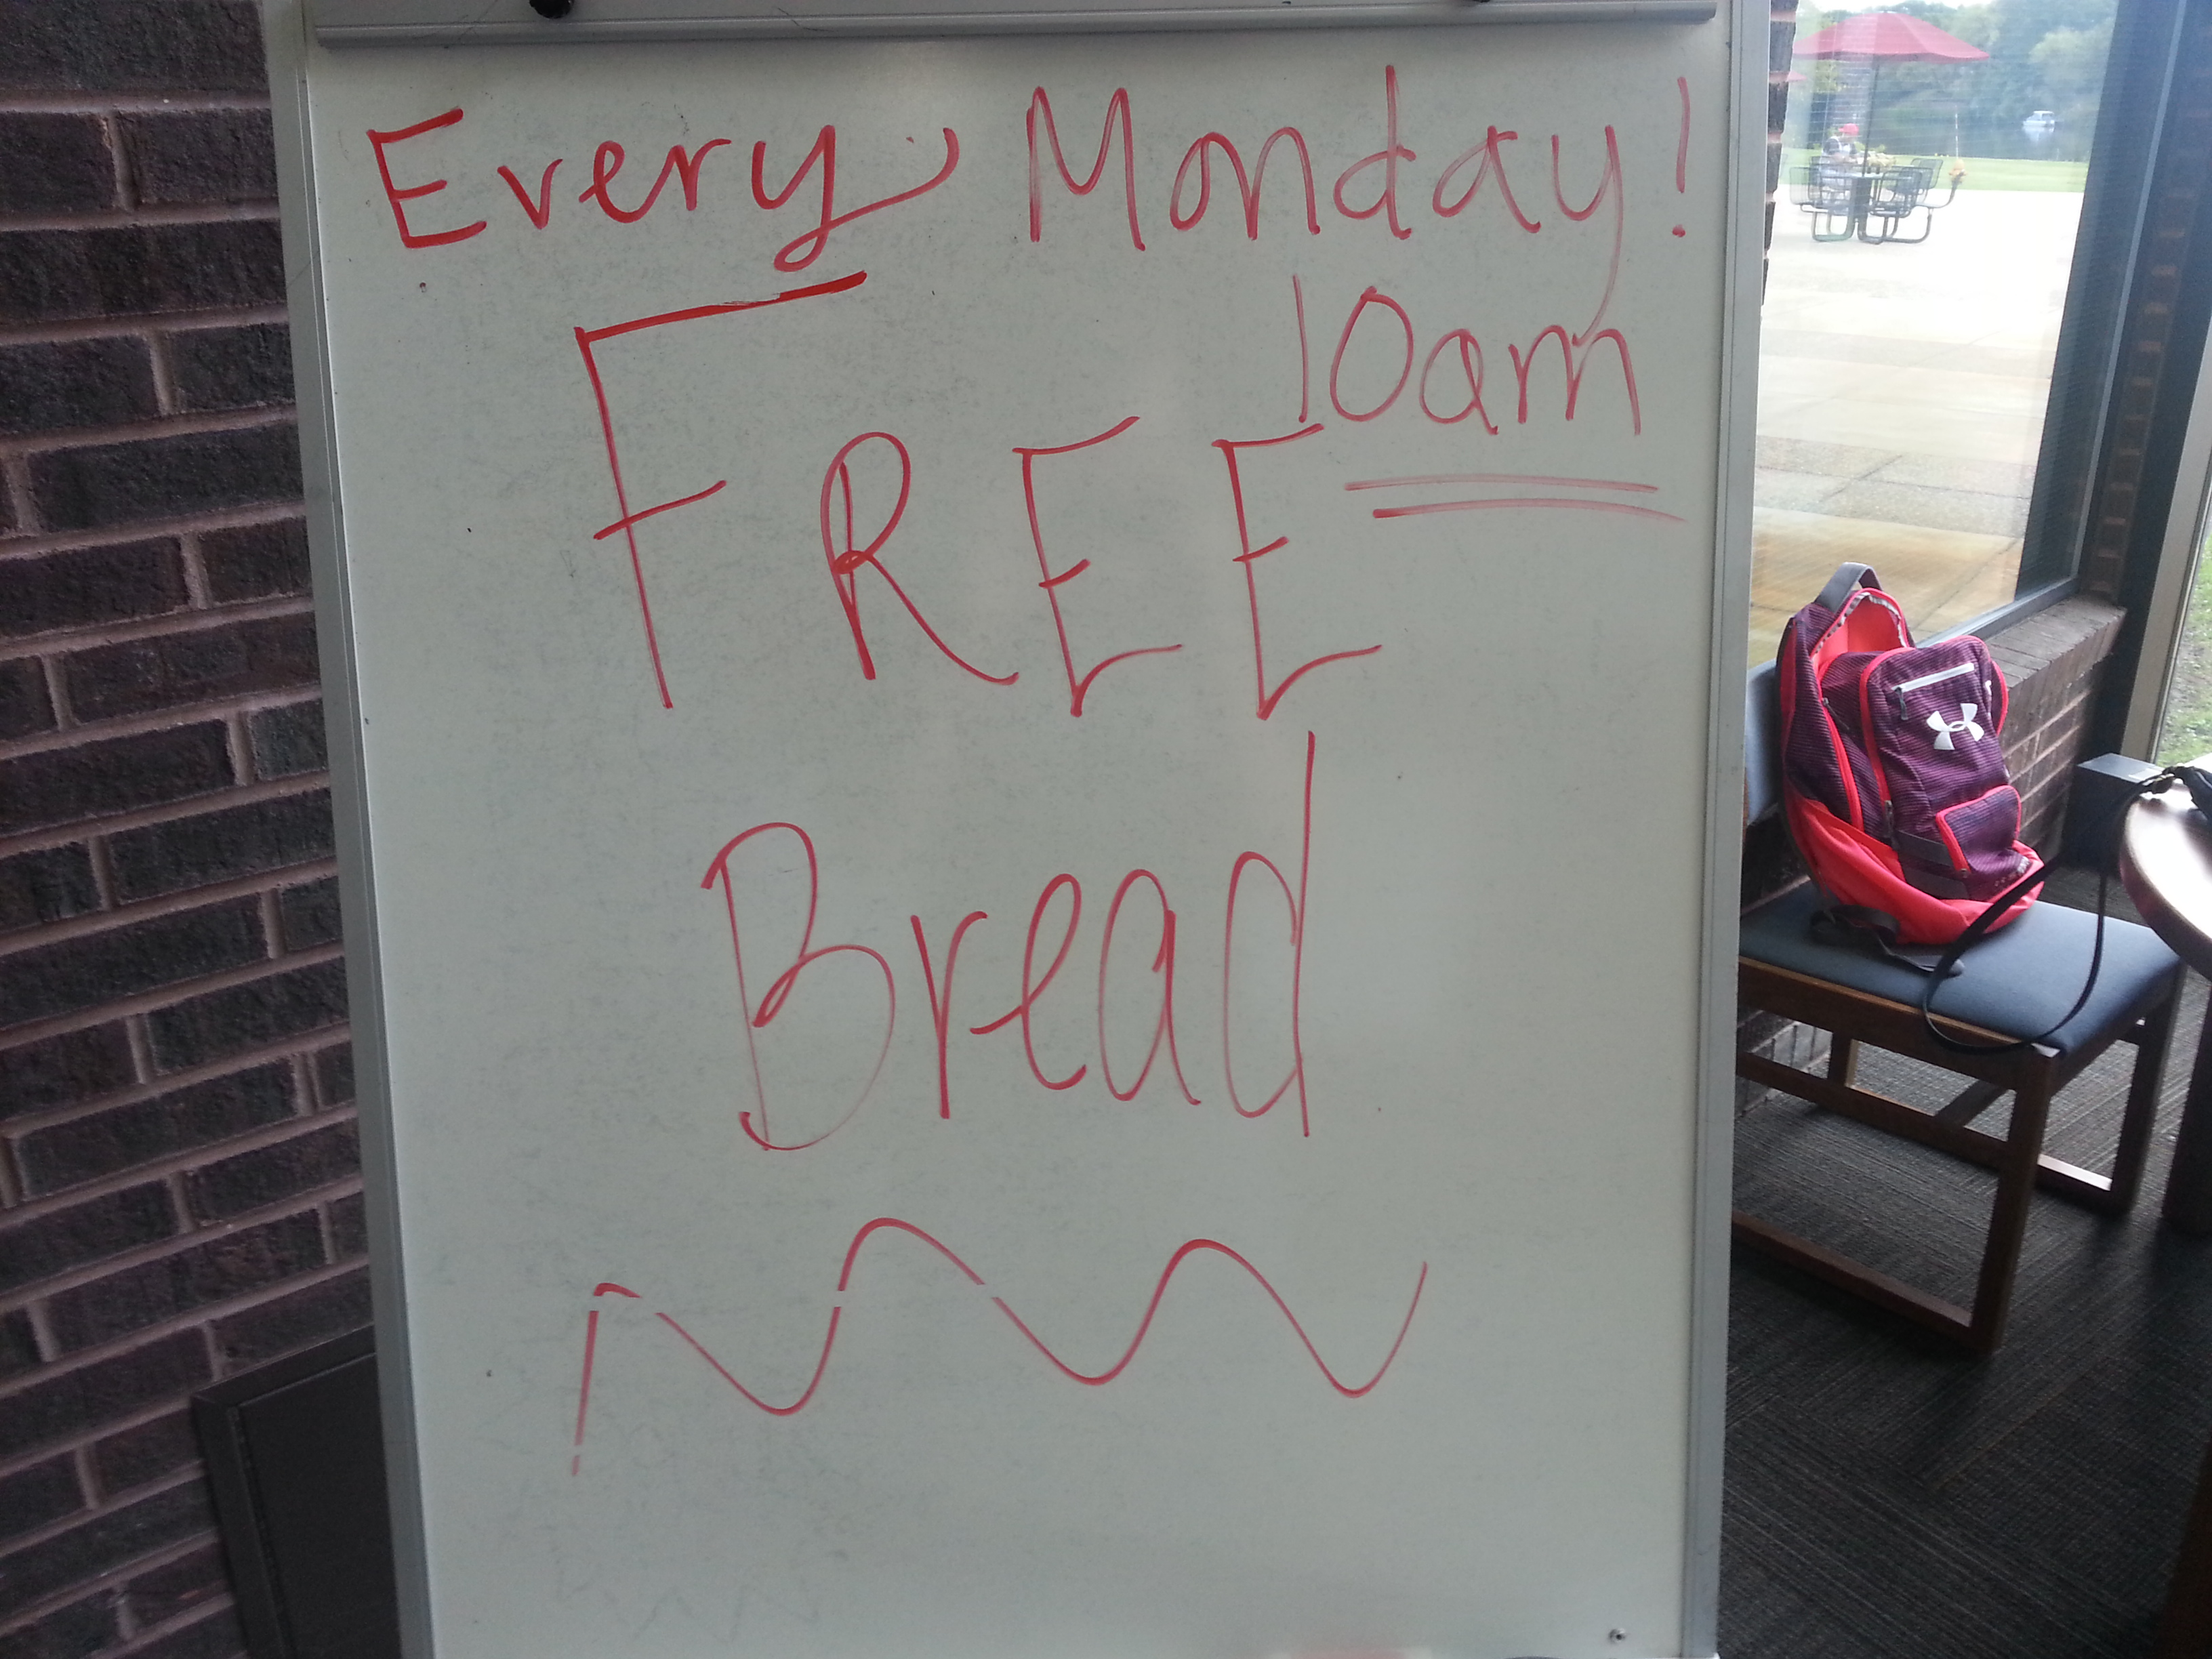 Bread will be given away every Monday